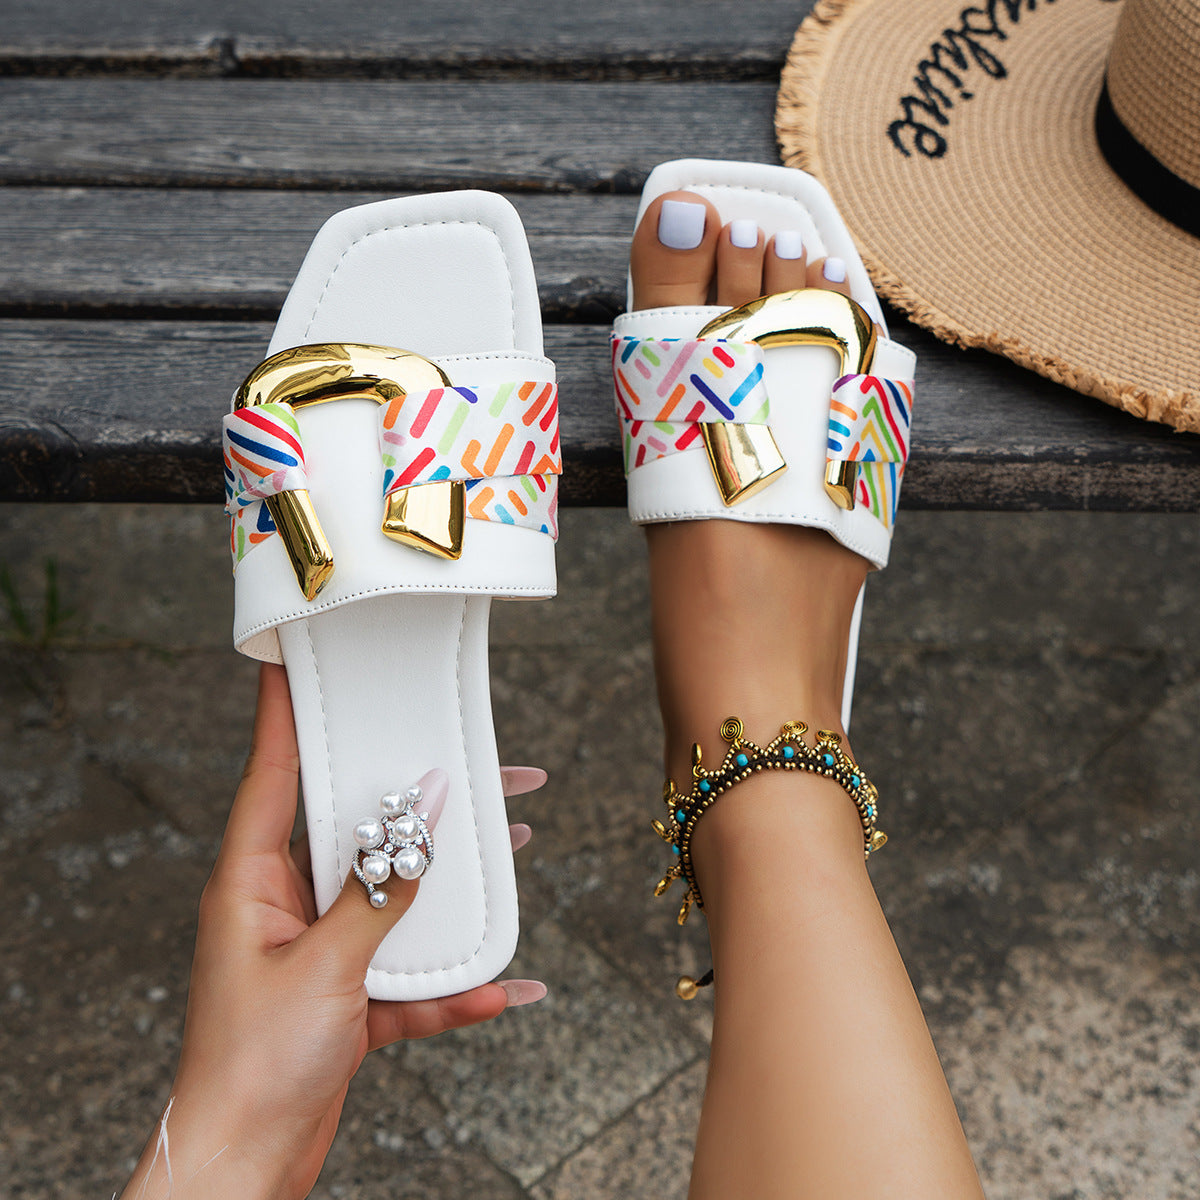 sandals  | Square Toe Flat Sandals Metal Buckle Slippers Summer Beach Shoes Women | White |  Size36| thecurvestory.myshopify.com